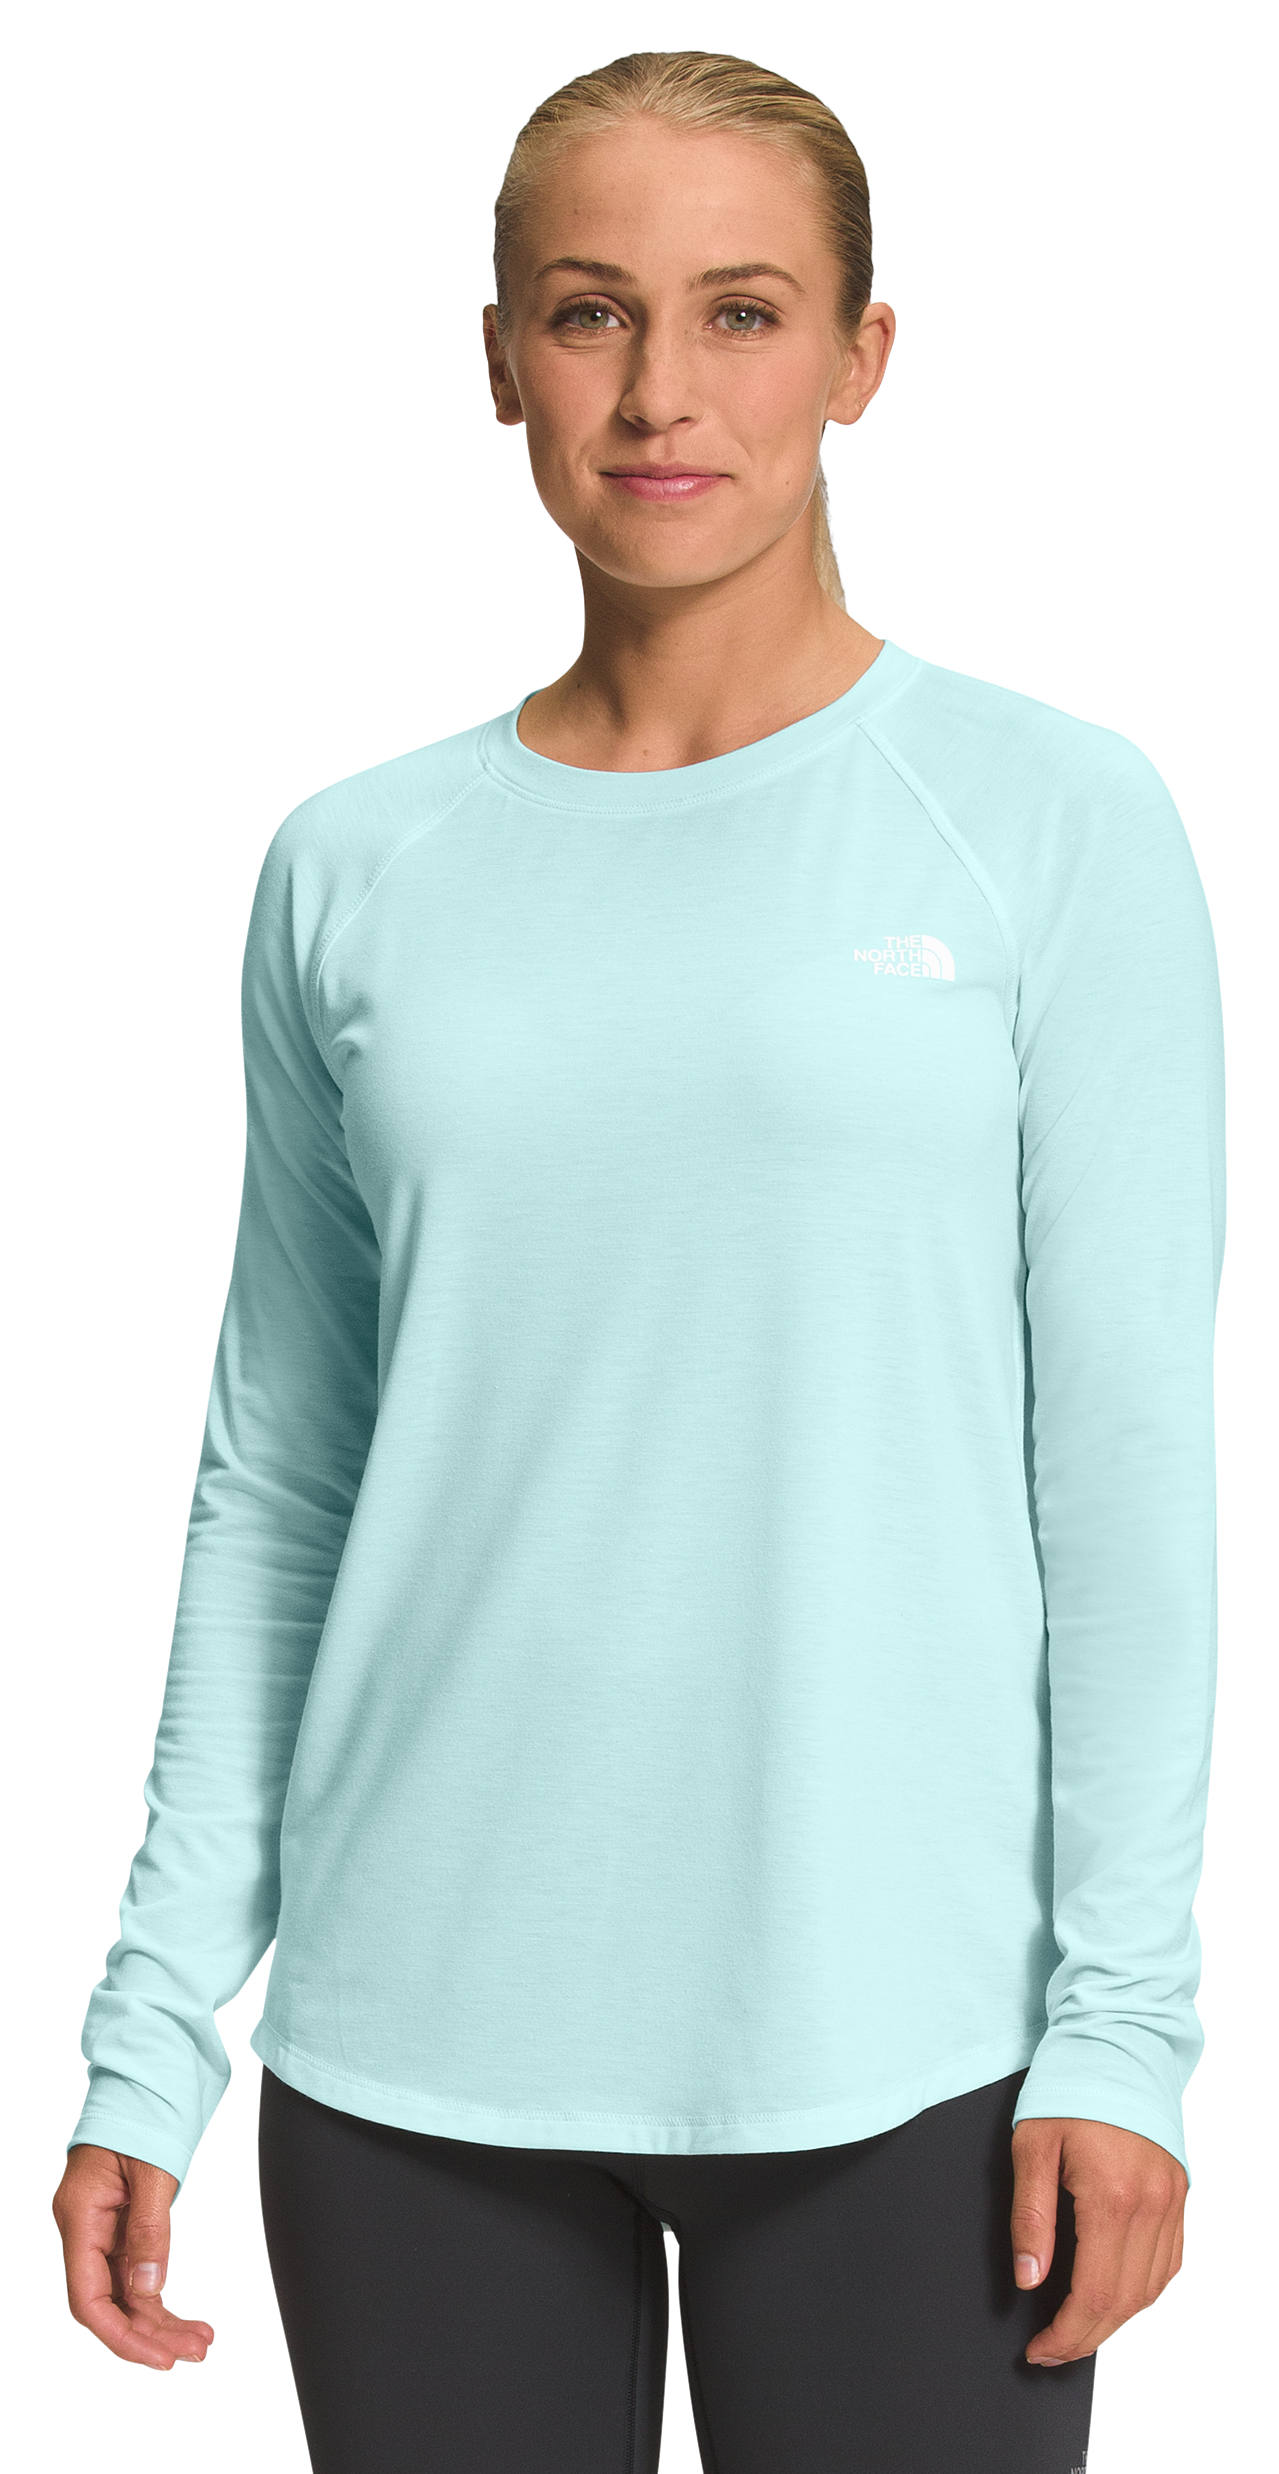 The North Face Wander Hi-Low Long-Sleeve Shirt for Ladies - Skylight Blue Heather - M